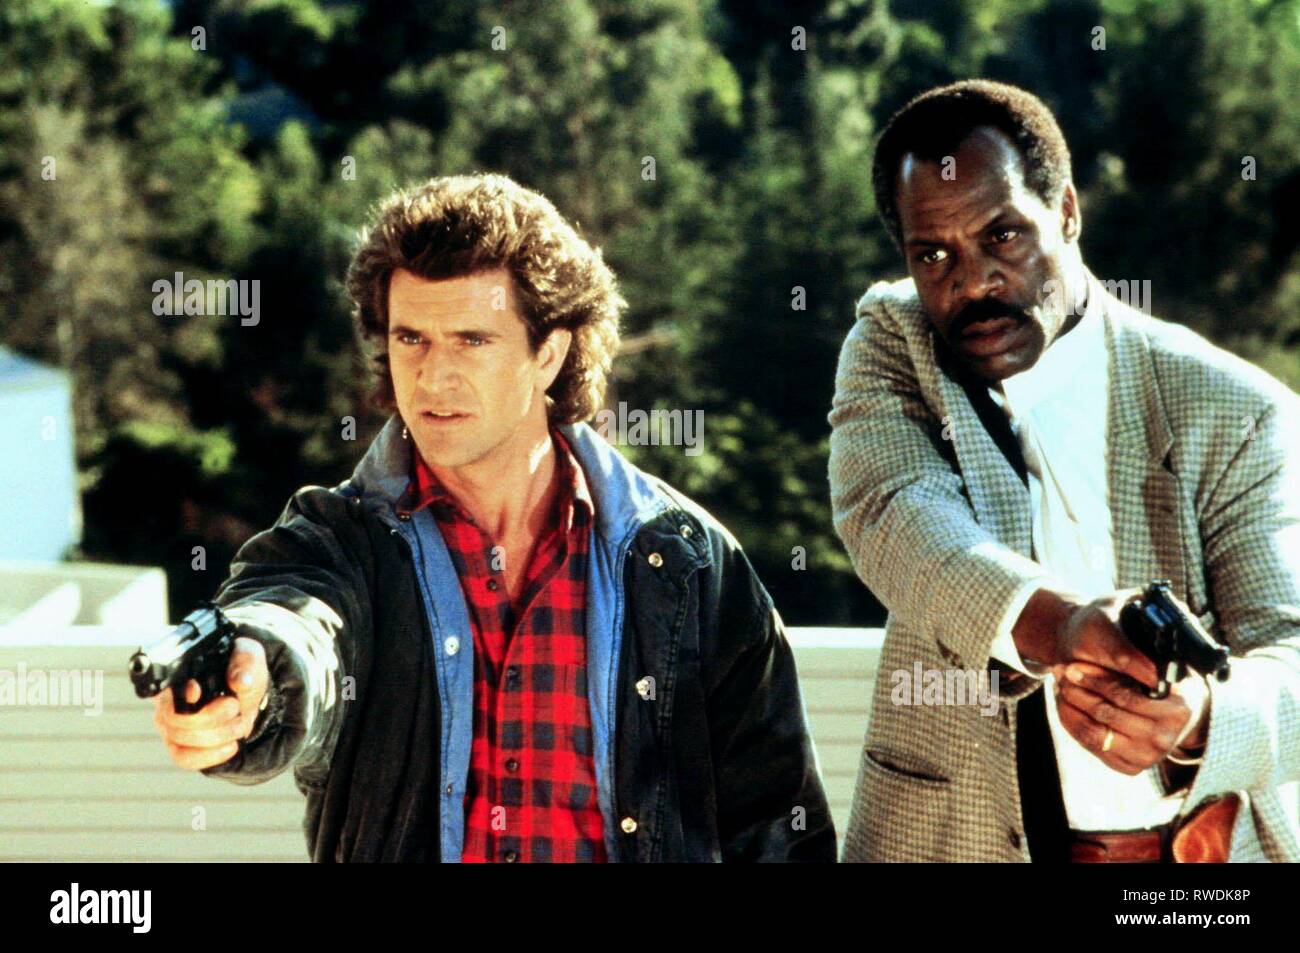 GIBSON, GLOVER, Lethal Weapon 2, 1989 Stockfoto